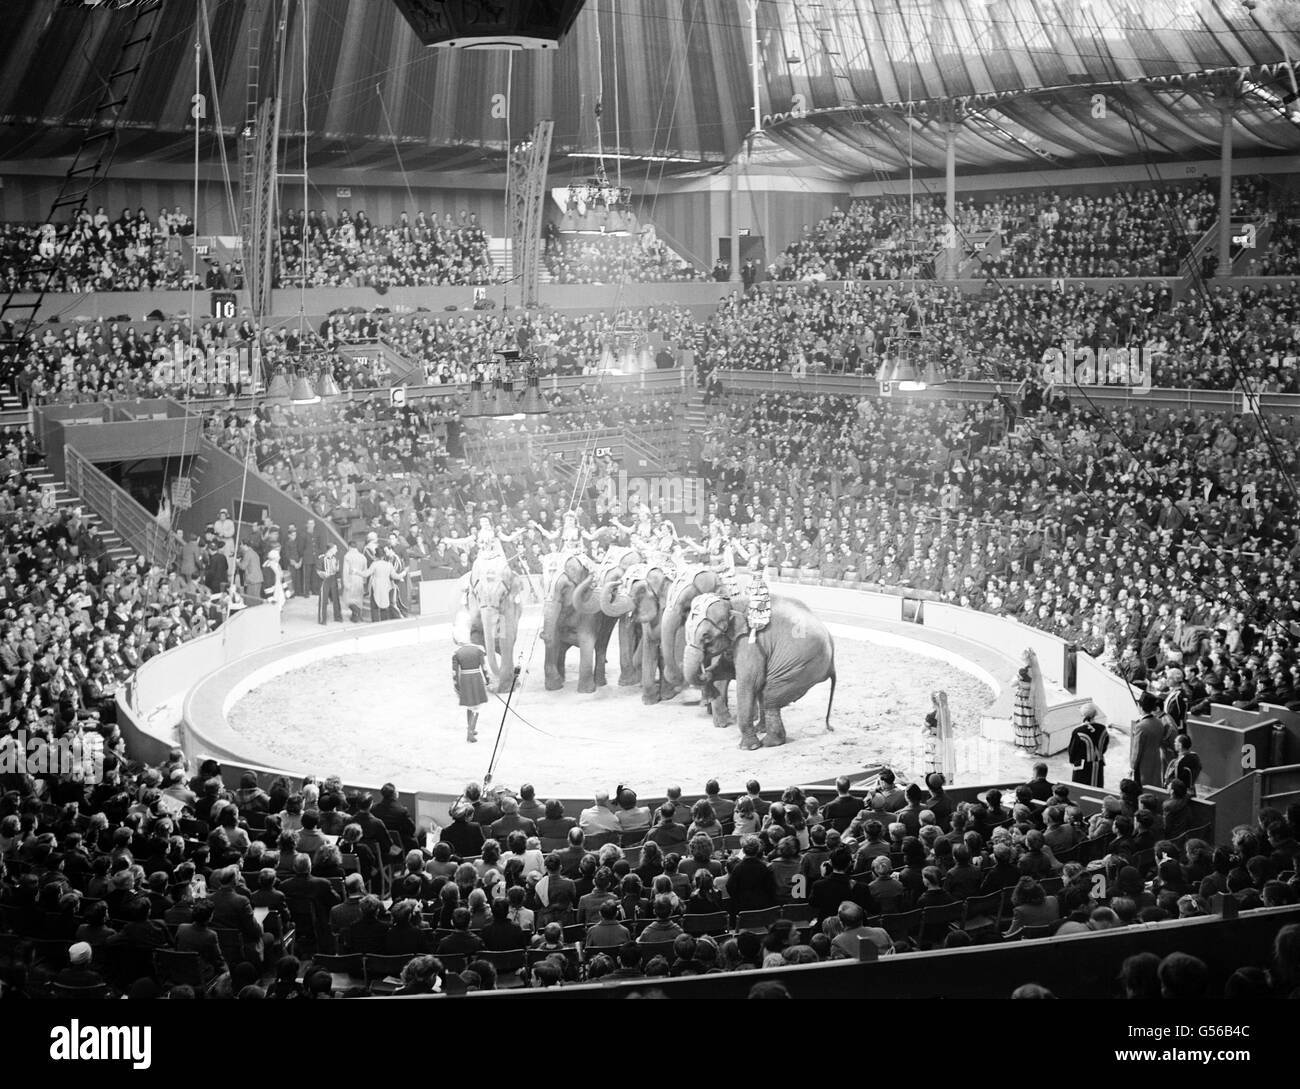 Six thousand children aged from 10 to 14 years who had never seen a circus before, at Olympia, London, to watch the final dress rehearsal of the Bertram Mills Circus, as guests of Cyril and Bernard Mills. The children included contingents from schools for physically handicapped, orphanages, homes and missions. Stock Photo